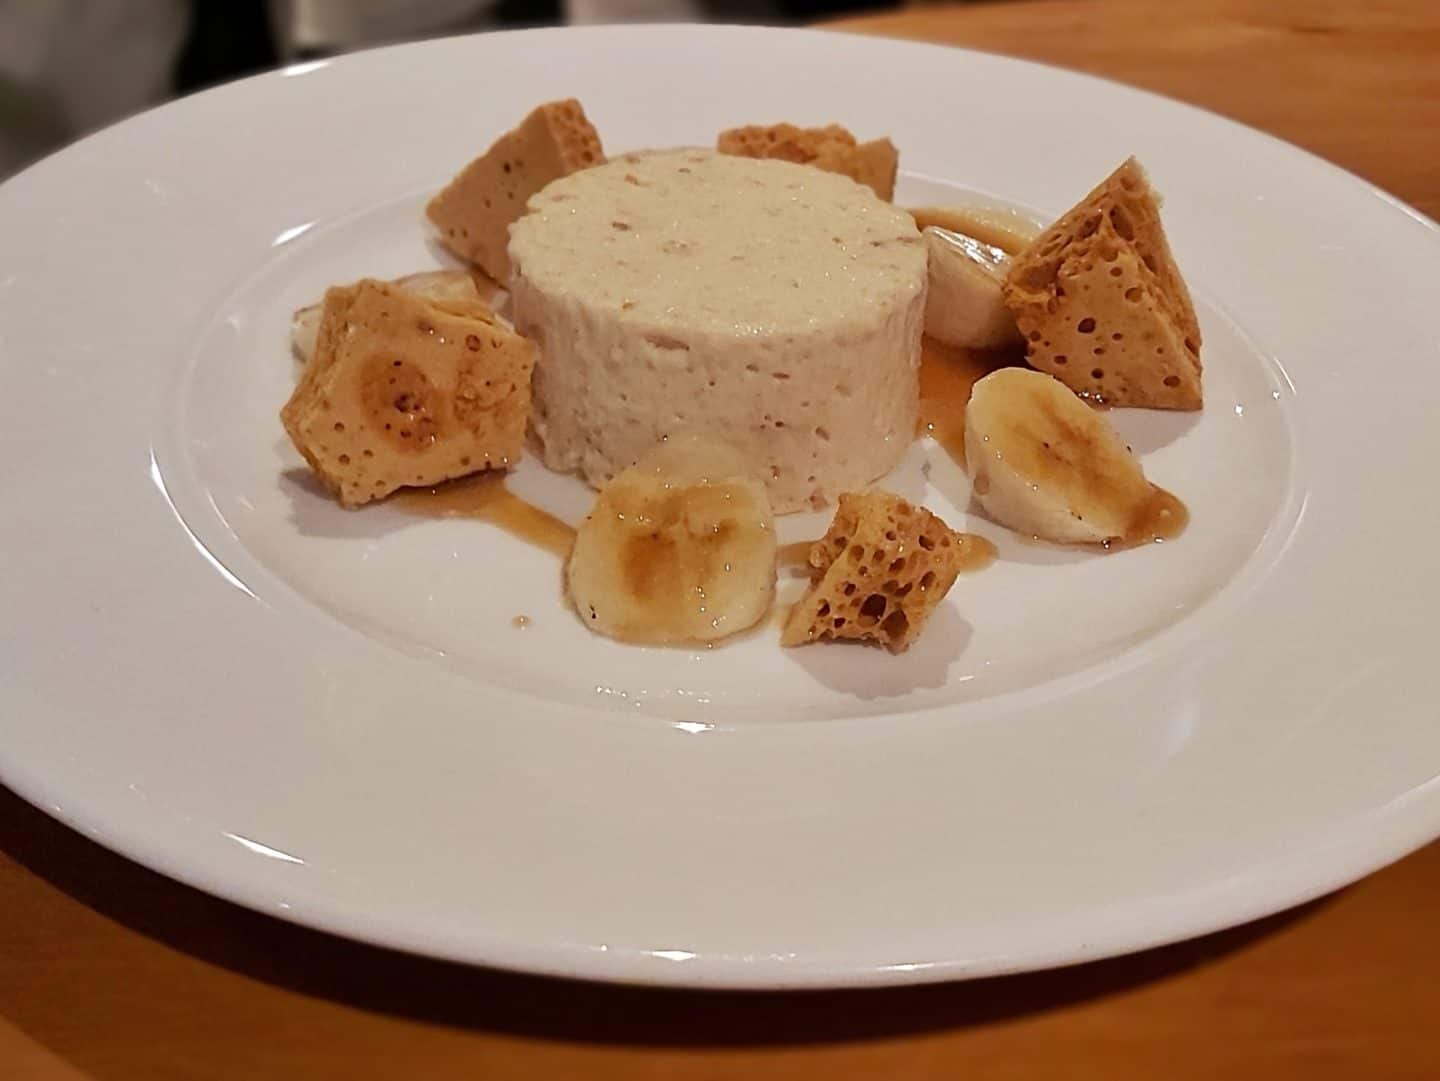 peanut butter parfait with banana and honeycomb